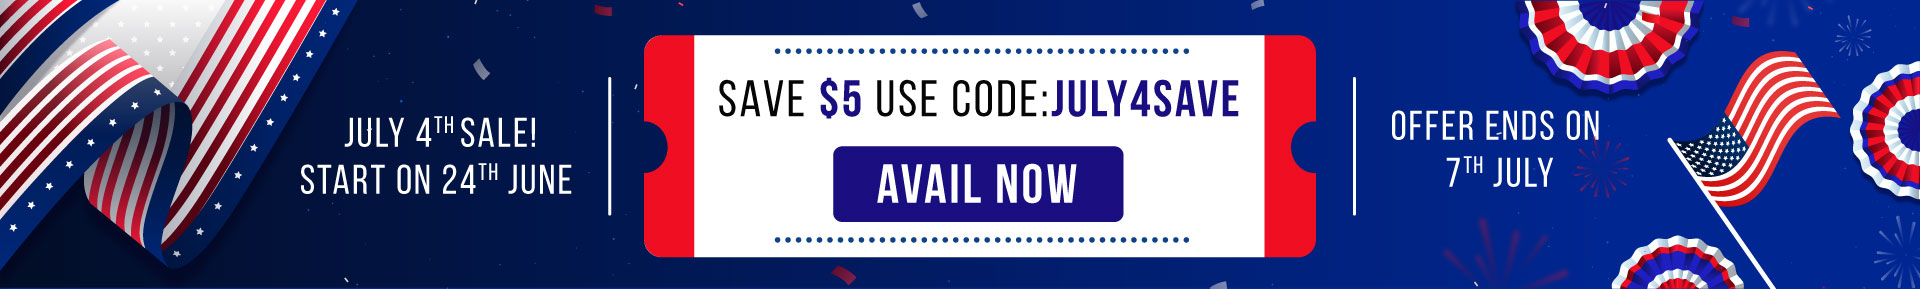 Independence-day-offer-code